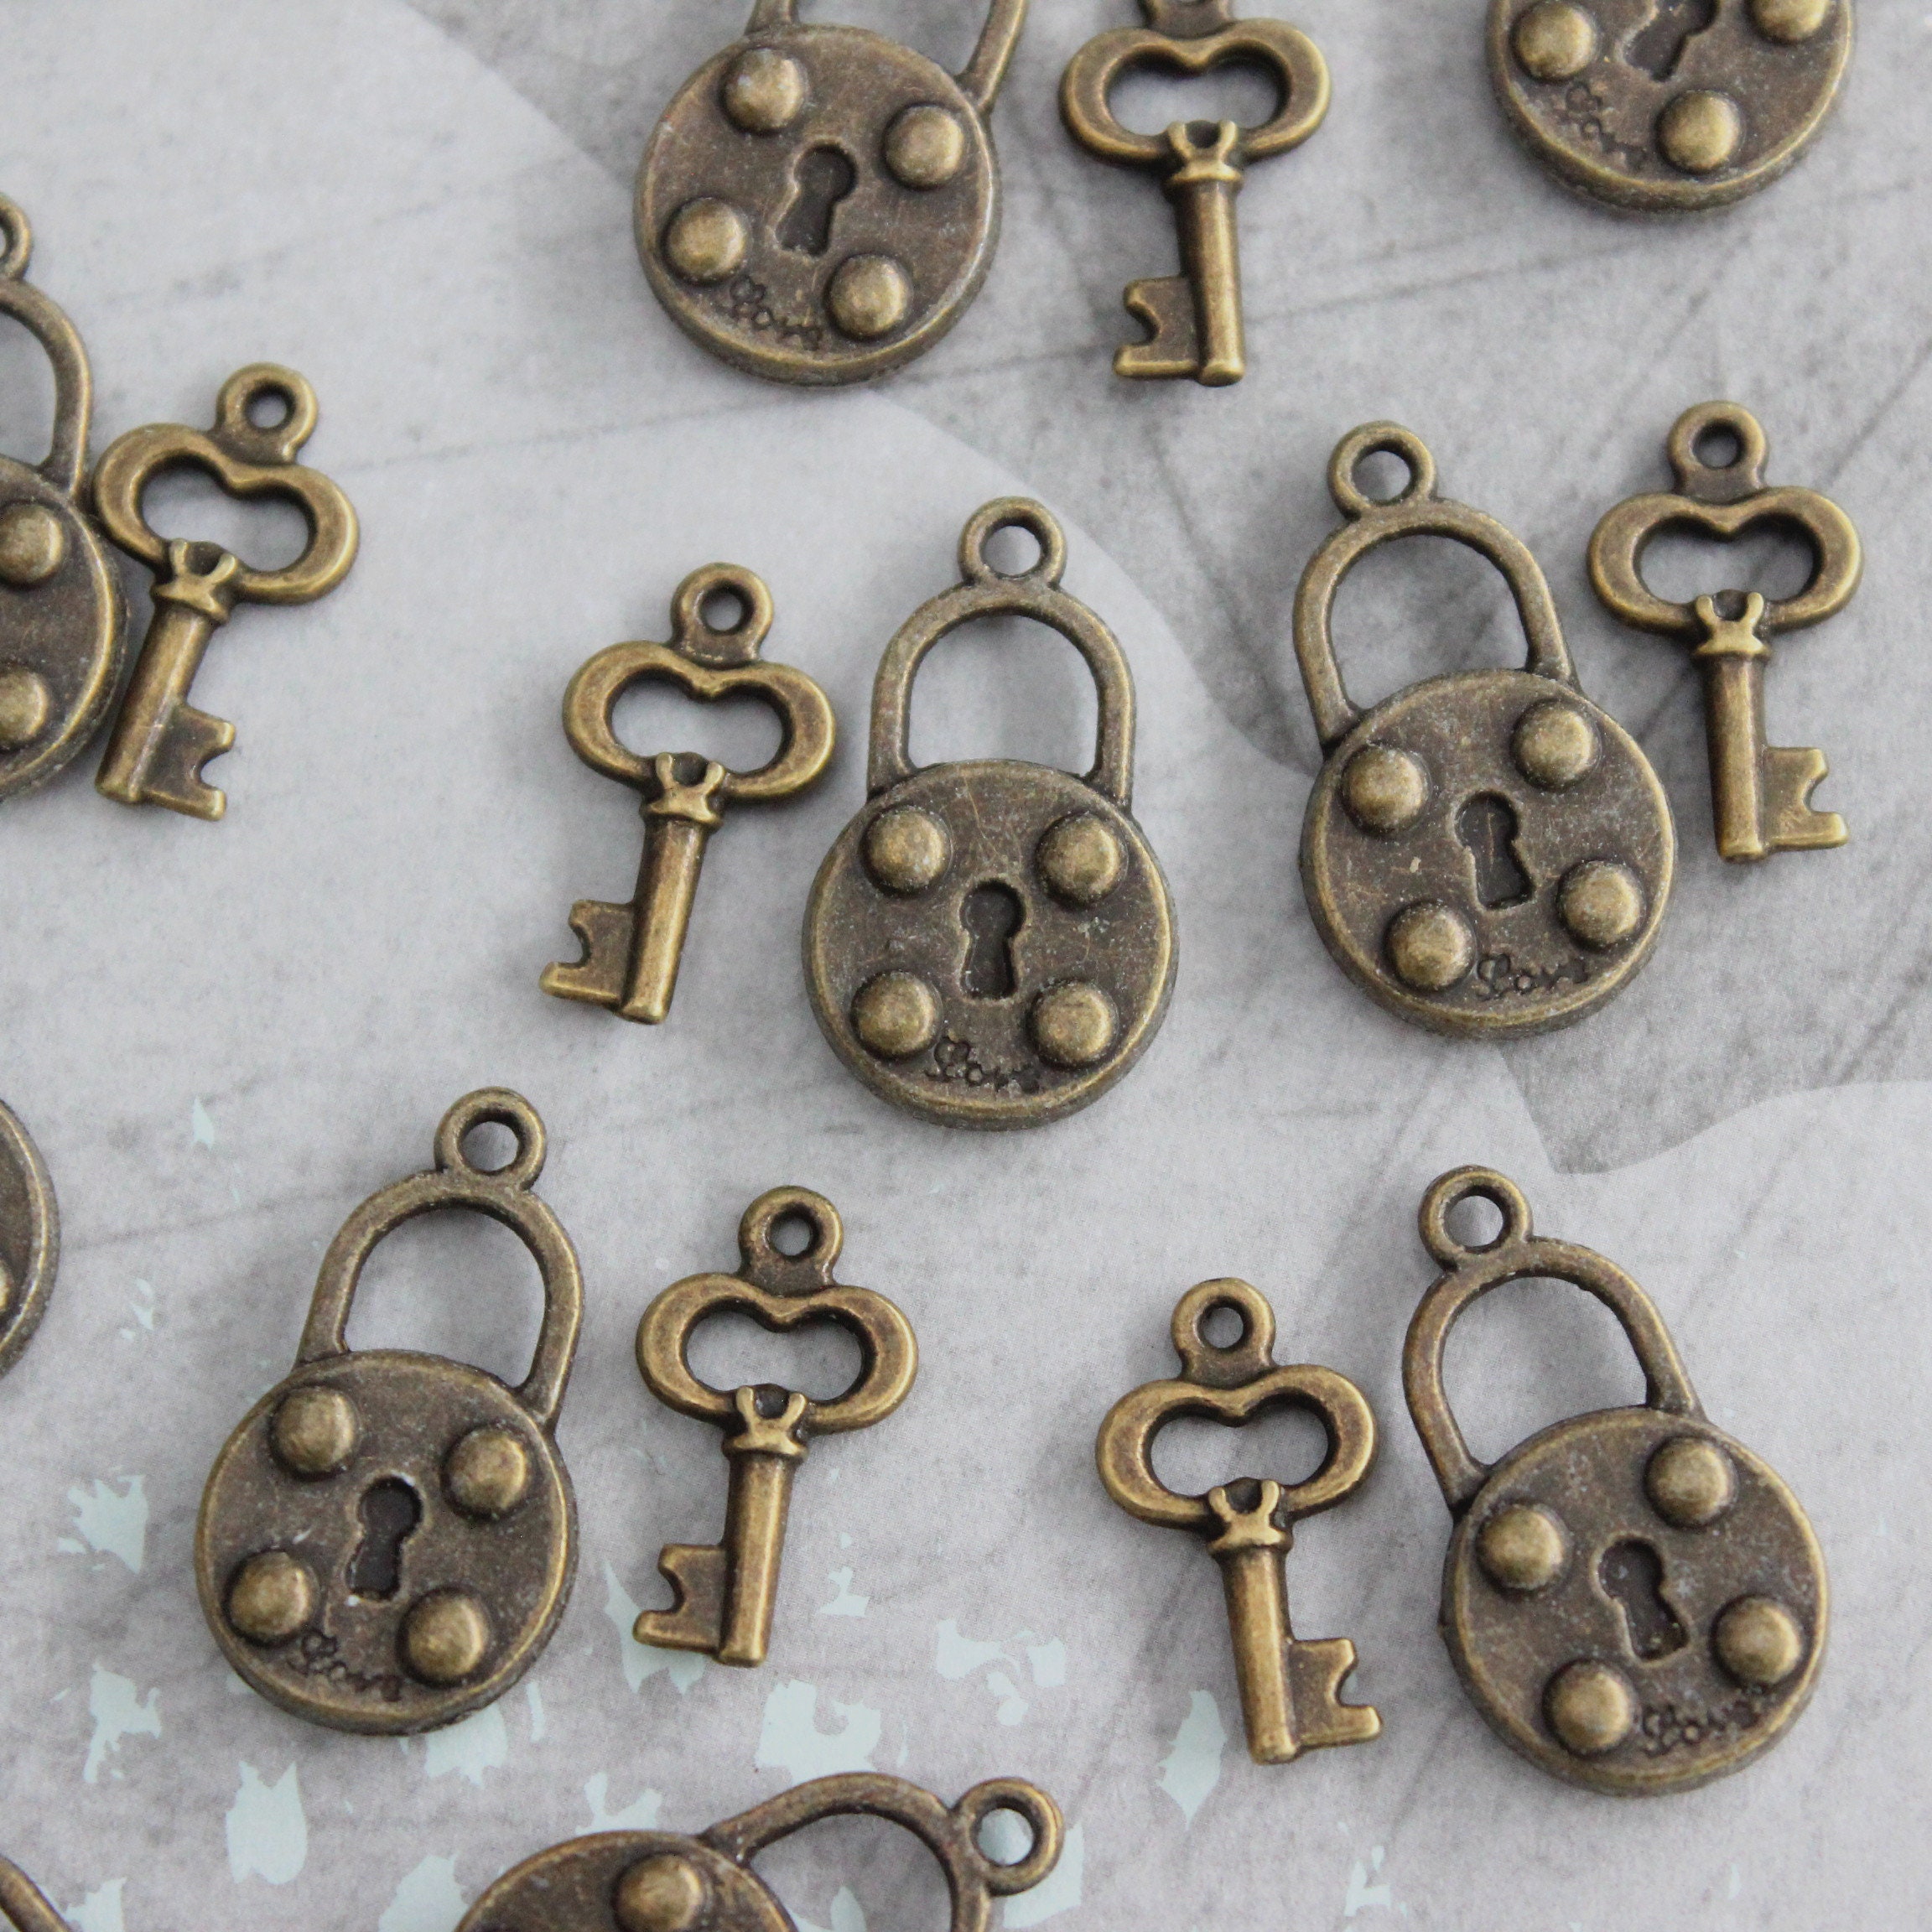 Antique Lock And Key Se Fabric, Wallpaper and Home Decor